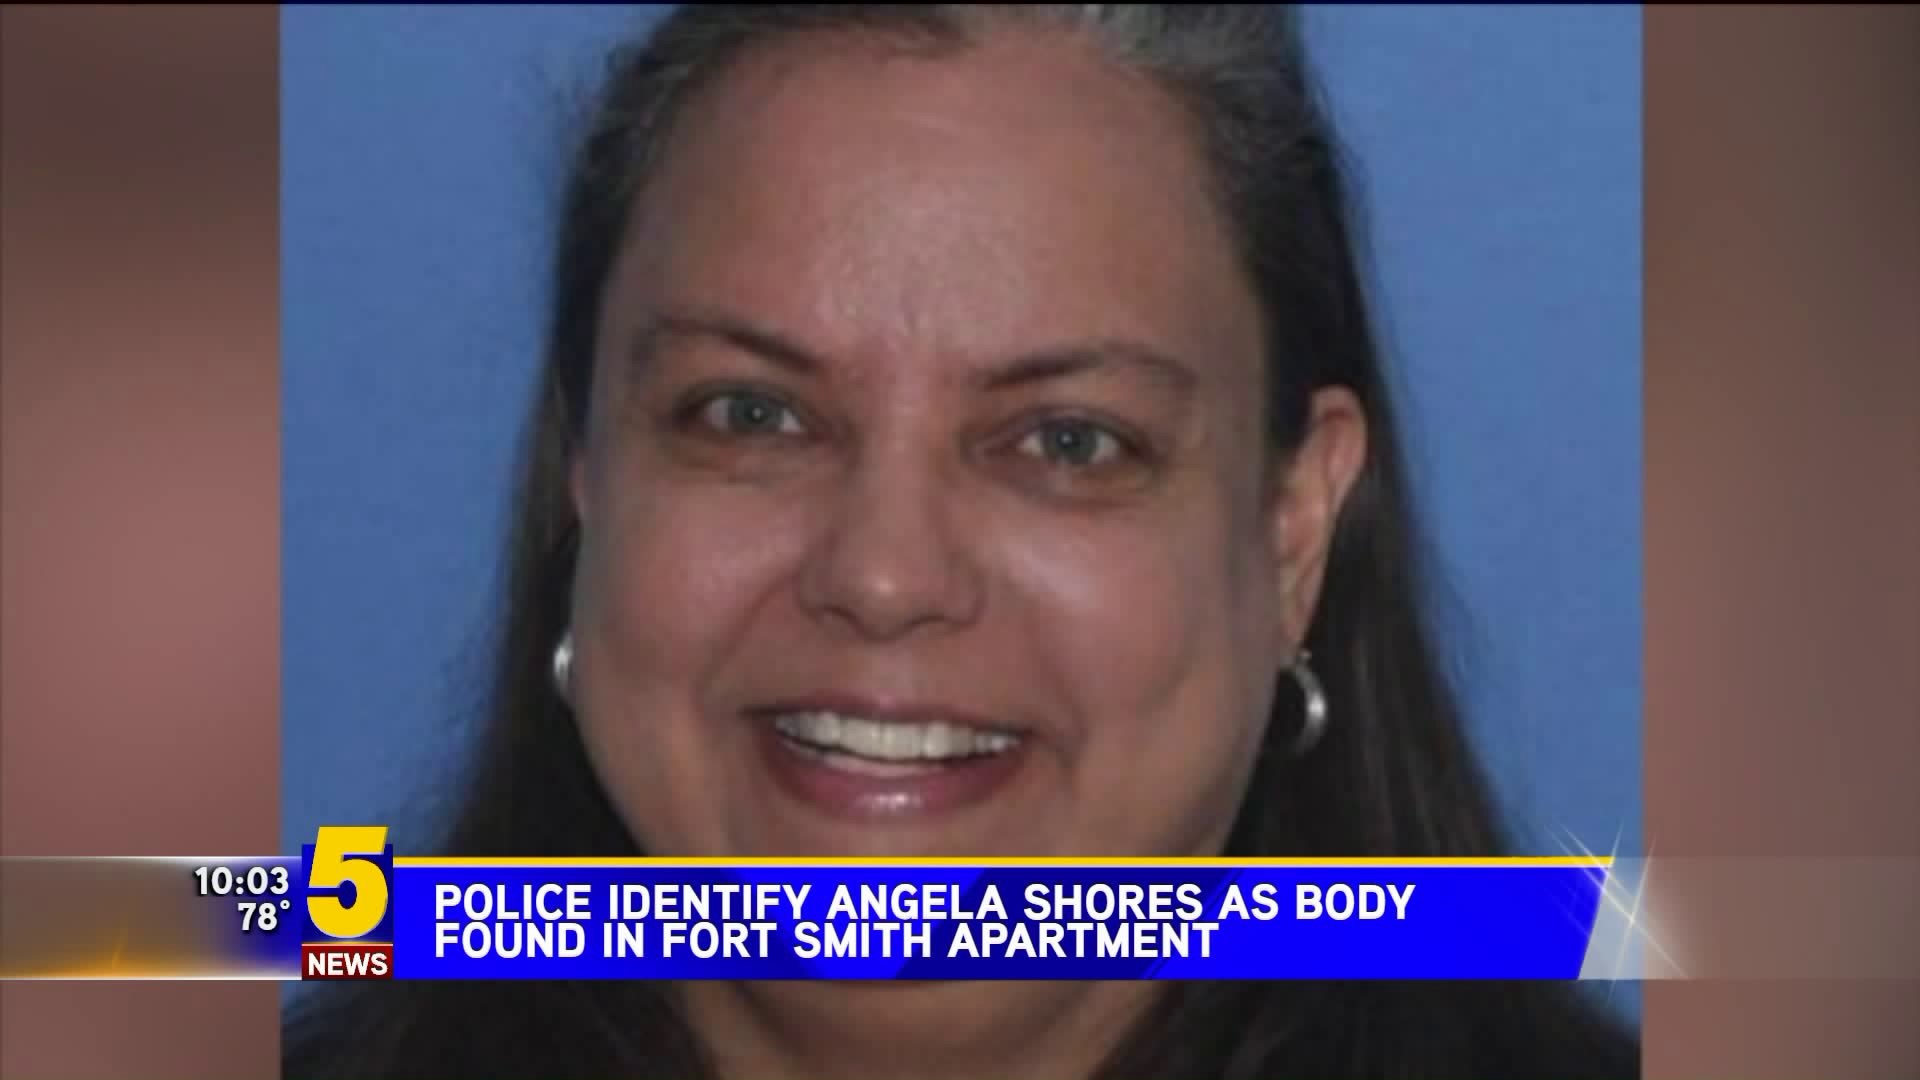 Police Identify Angela Shores As Body Found In Fort Smith Apartment